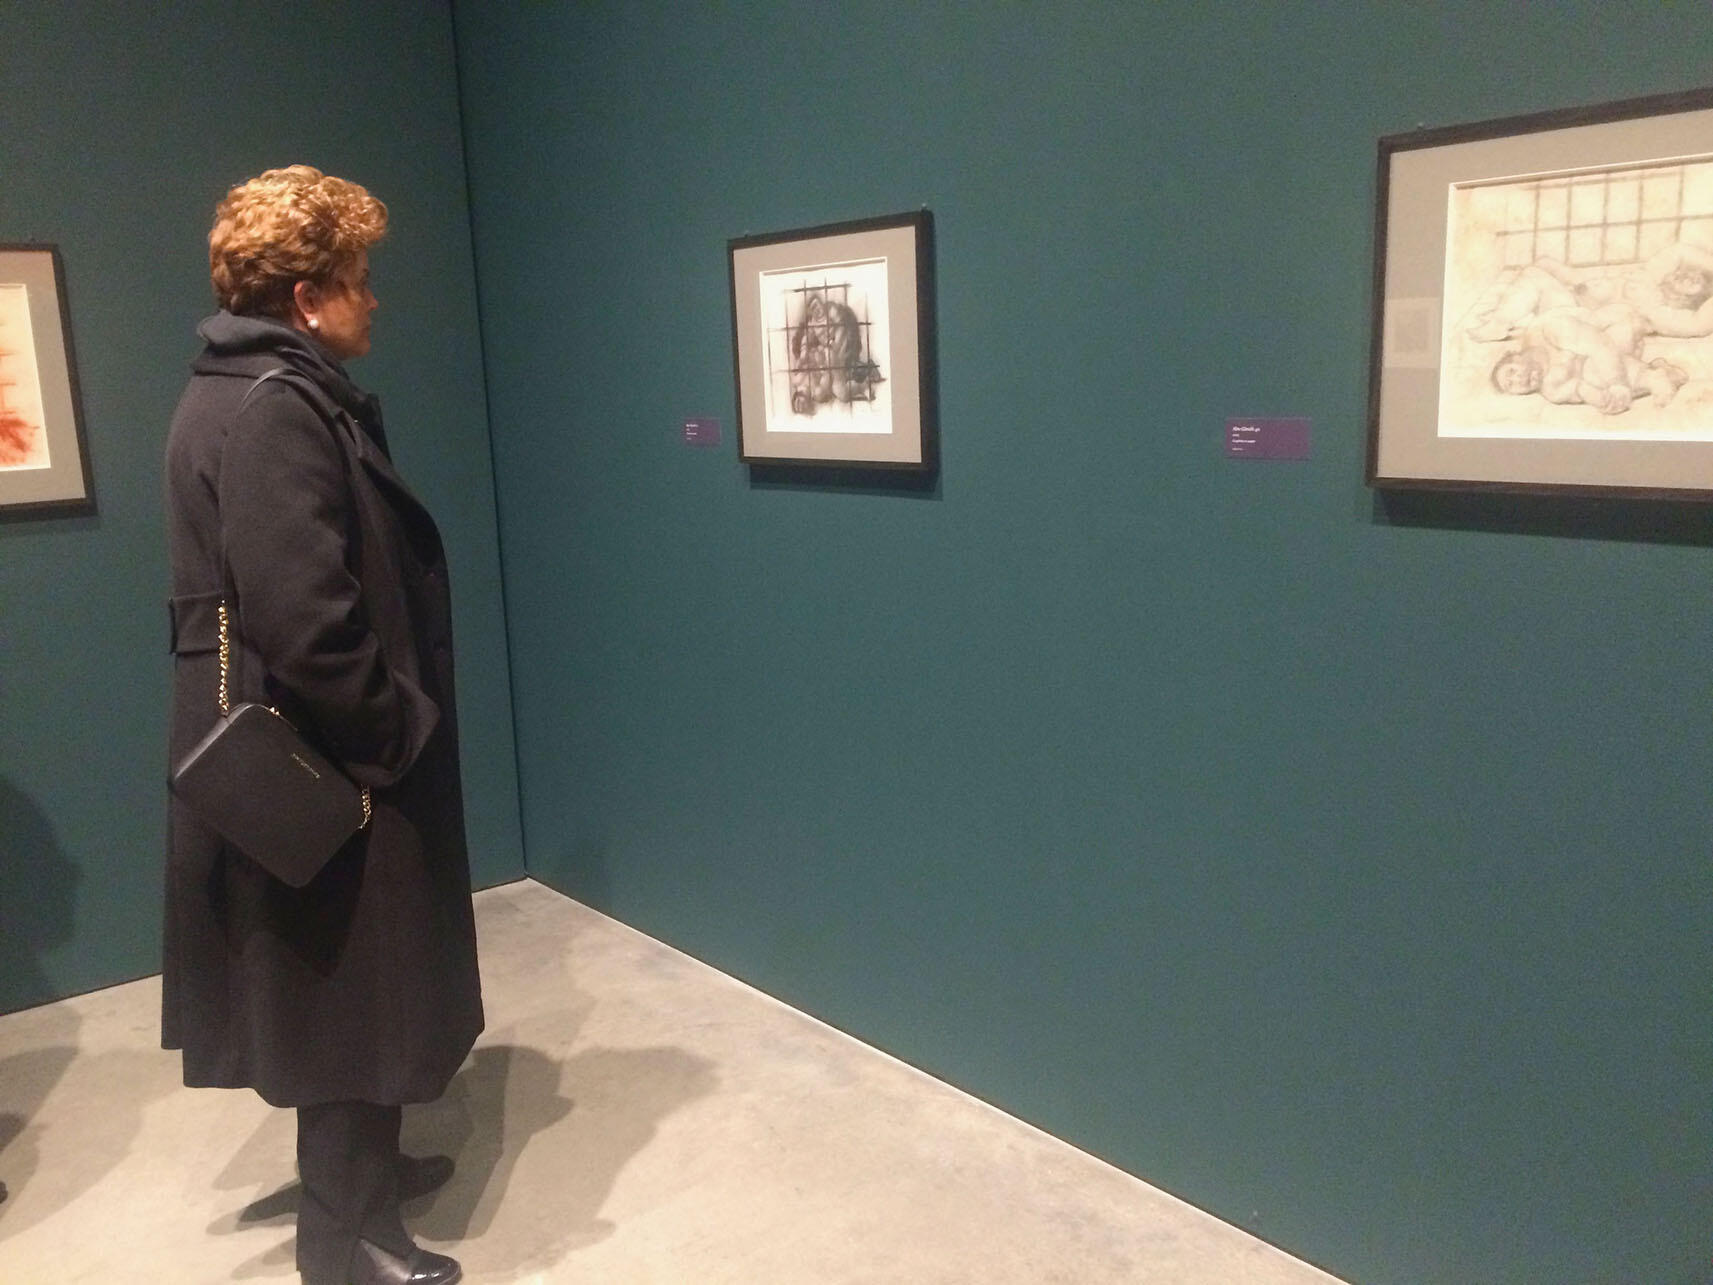 Dilma Rousseff gazes at Botero’s “Abu Ghraib 17” in the Berkeley Art Museum. (Photo by Isabel Nogueira.)